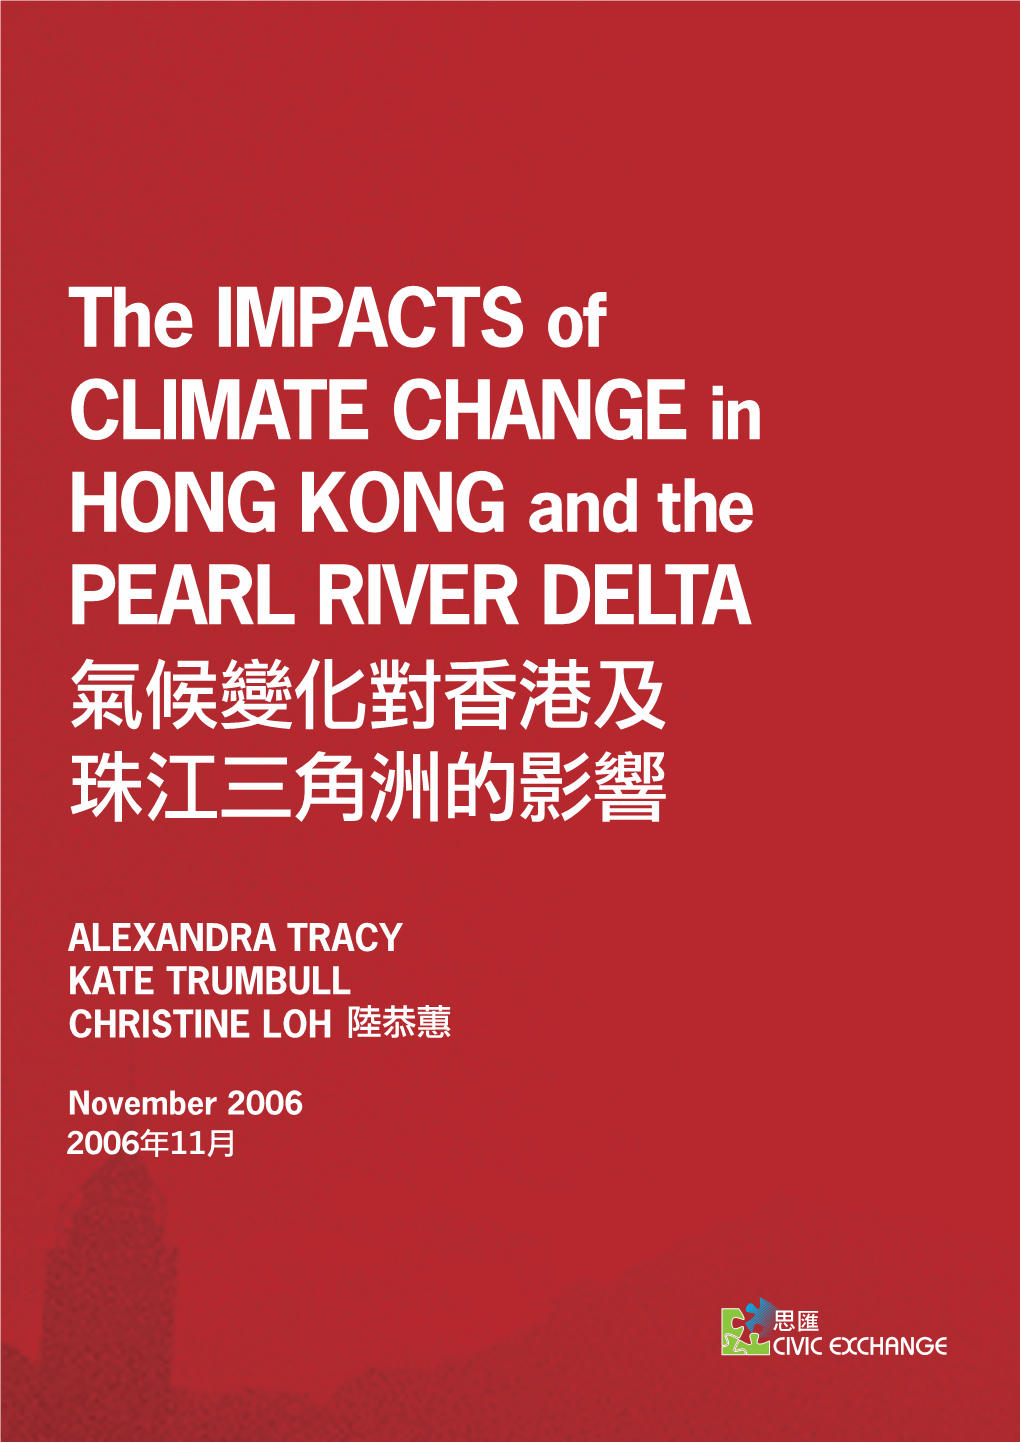 The IMPACTS of CLIMATE CHANGE in HONG KONG and the PEARL RIVER DELTA 氣候變化對香港及 珠江三角洲的影響